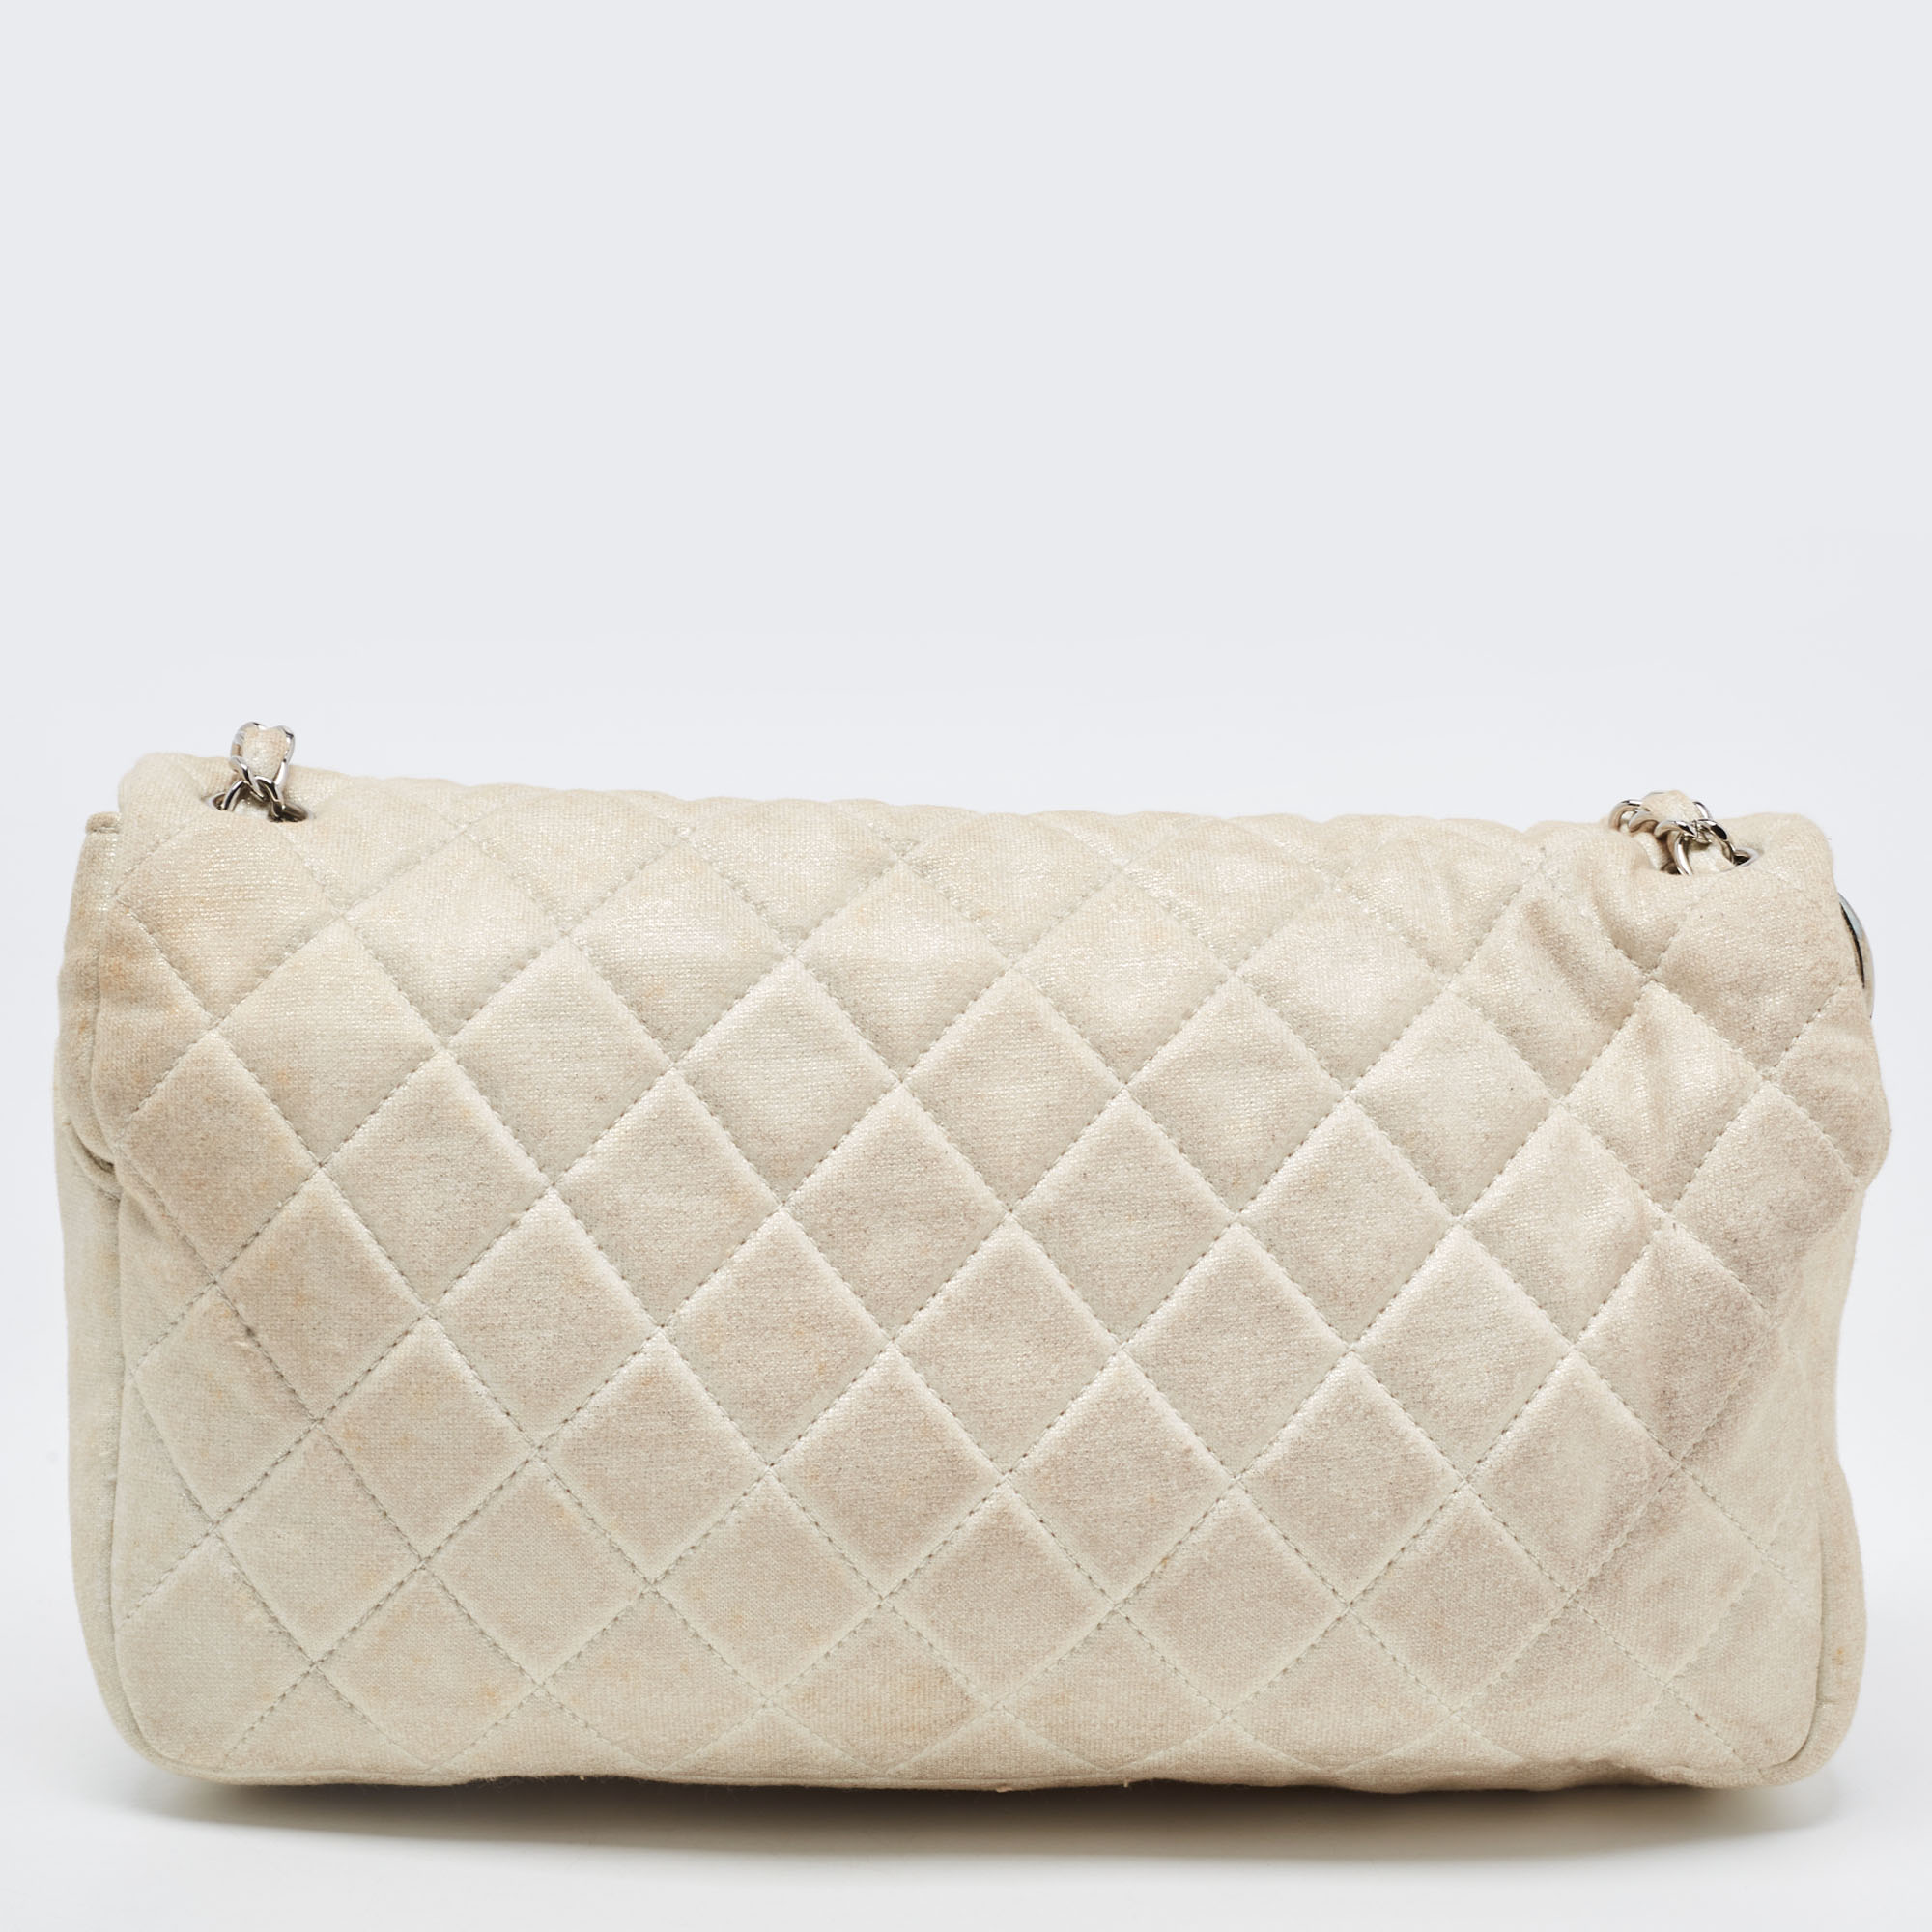 Chanel White/Gold Quilted Jersey CC Flap Bag